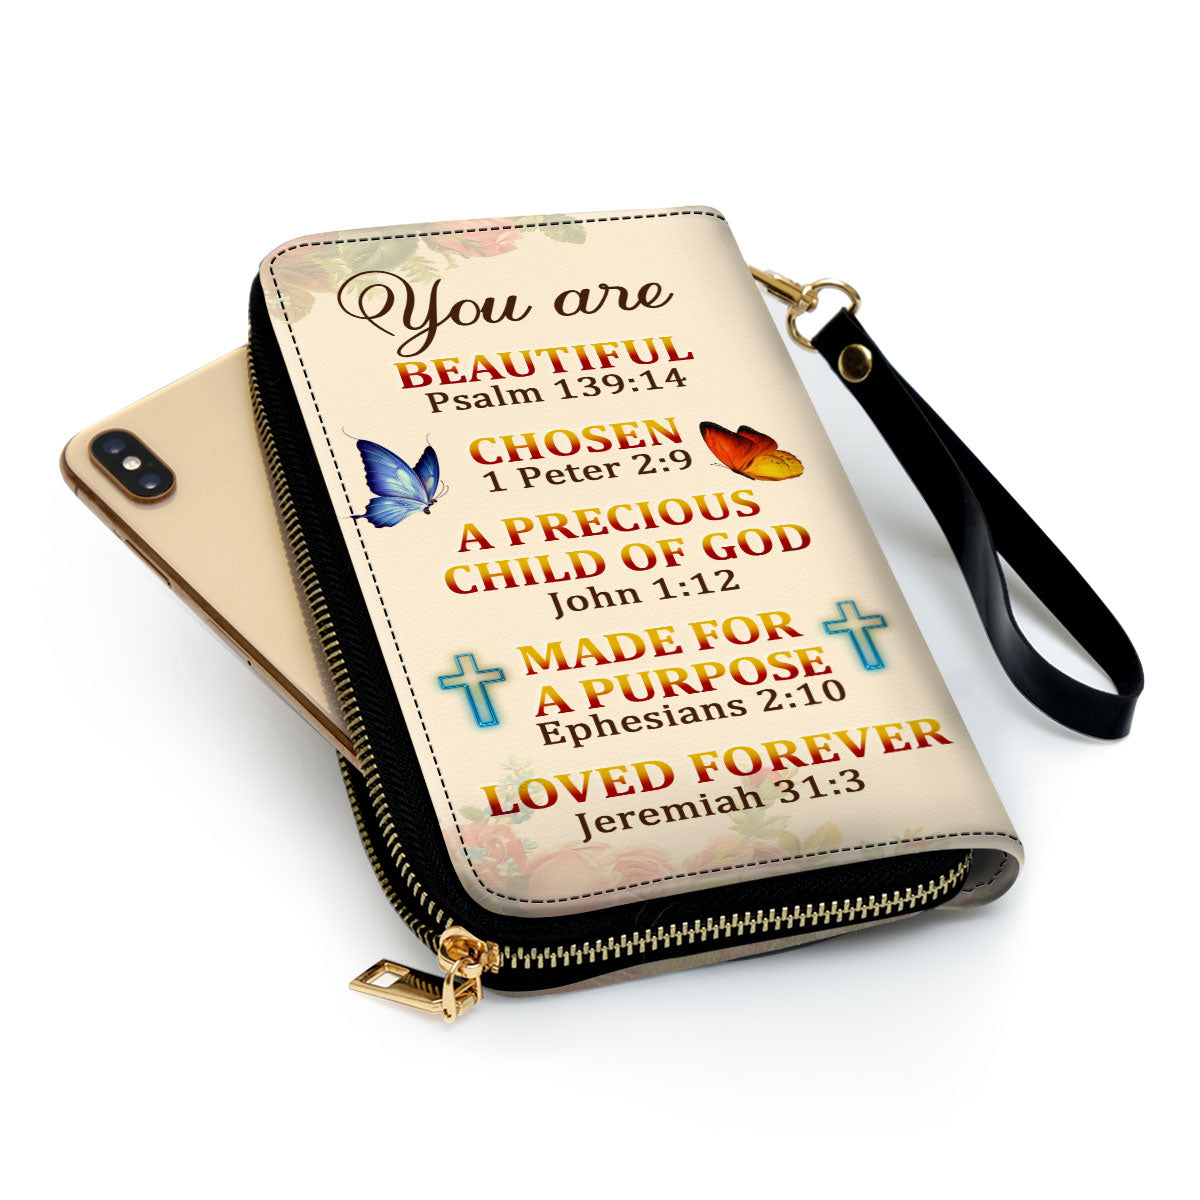 Jesuspirit | Personalized Leather Clutch Purse | A Precious Child Of God | Roses & Butterfly | Beautiful Gift For Christian Ladies CPM705